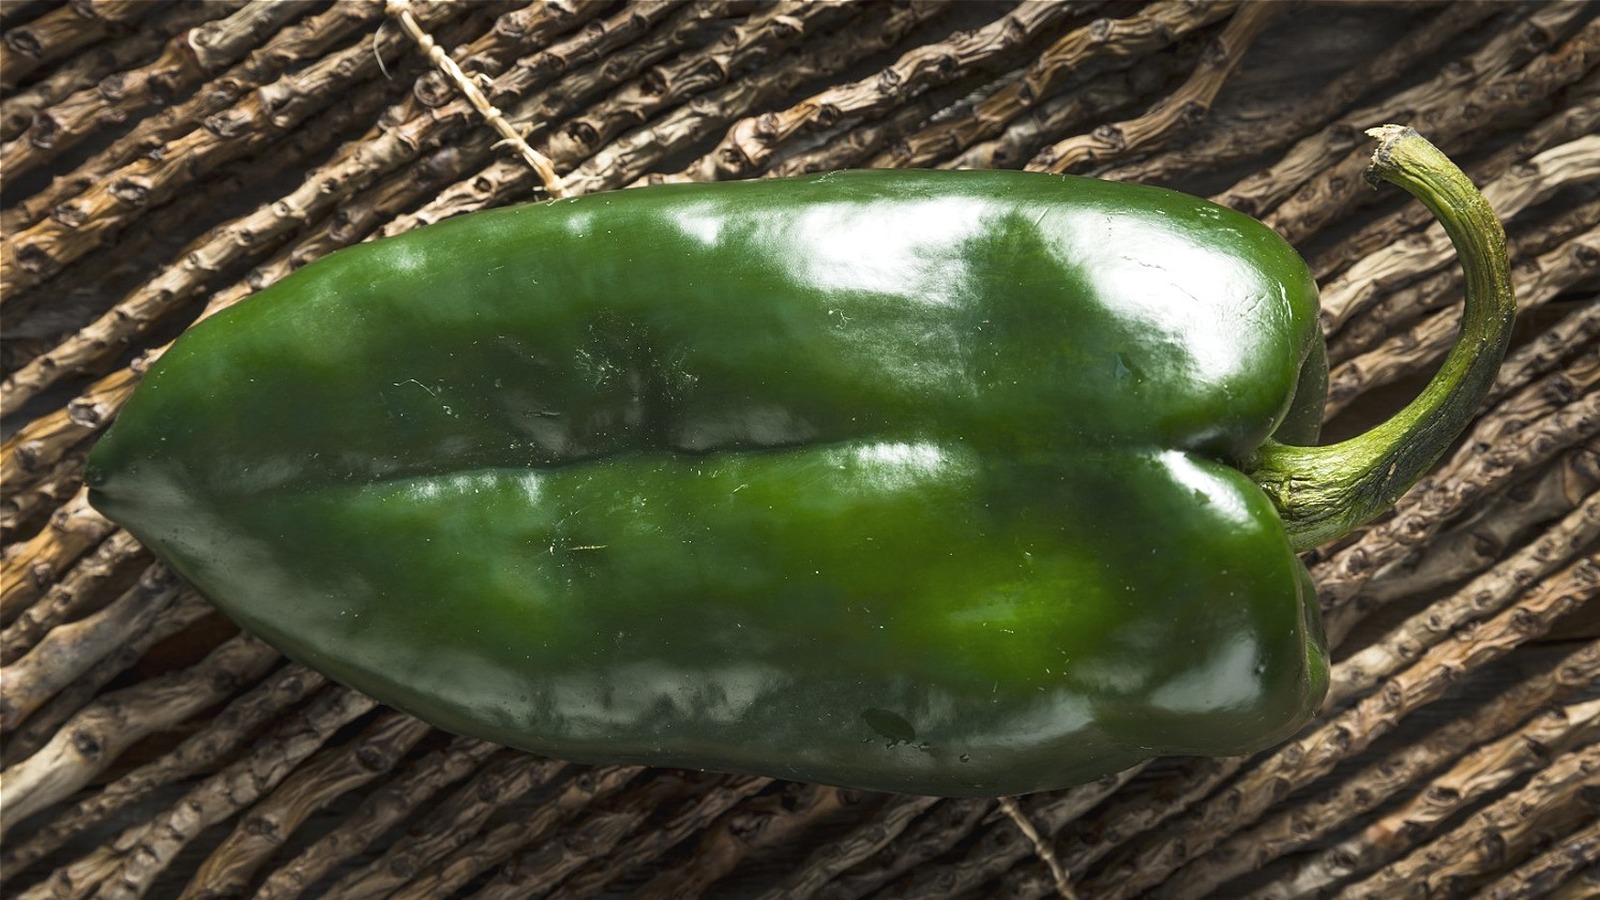 What Is A Poblano Pepper And How Spicy Is It? - Mashed